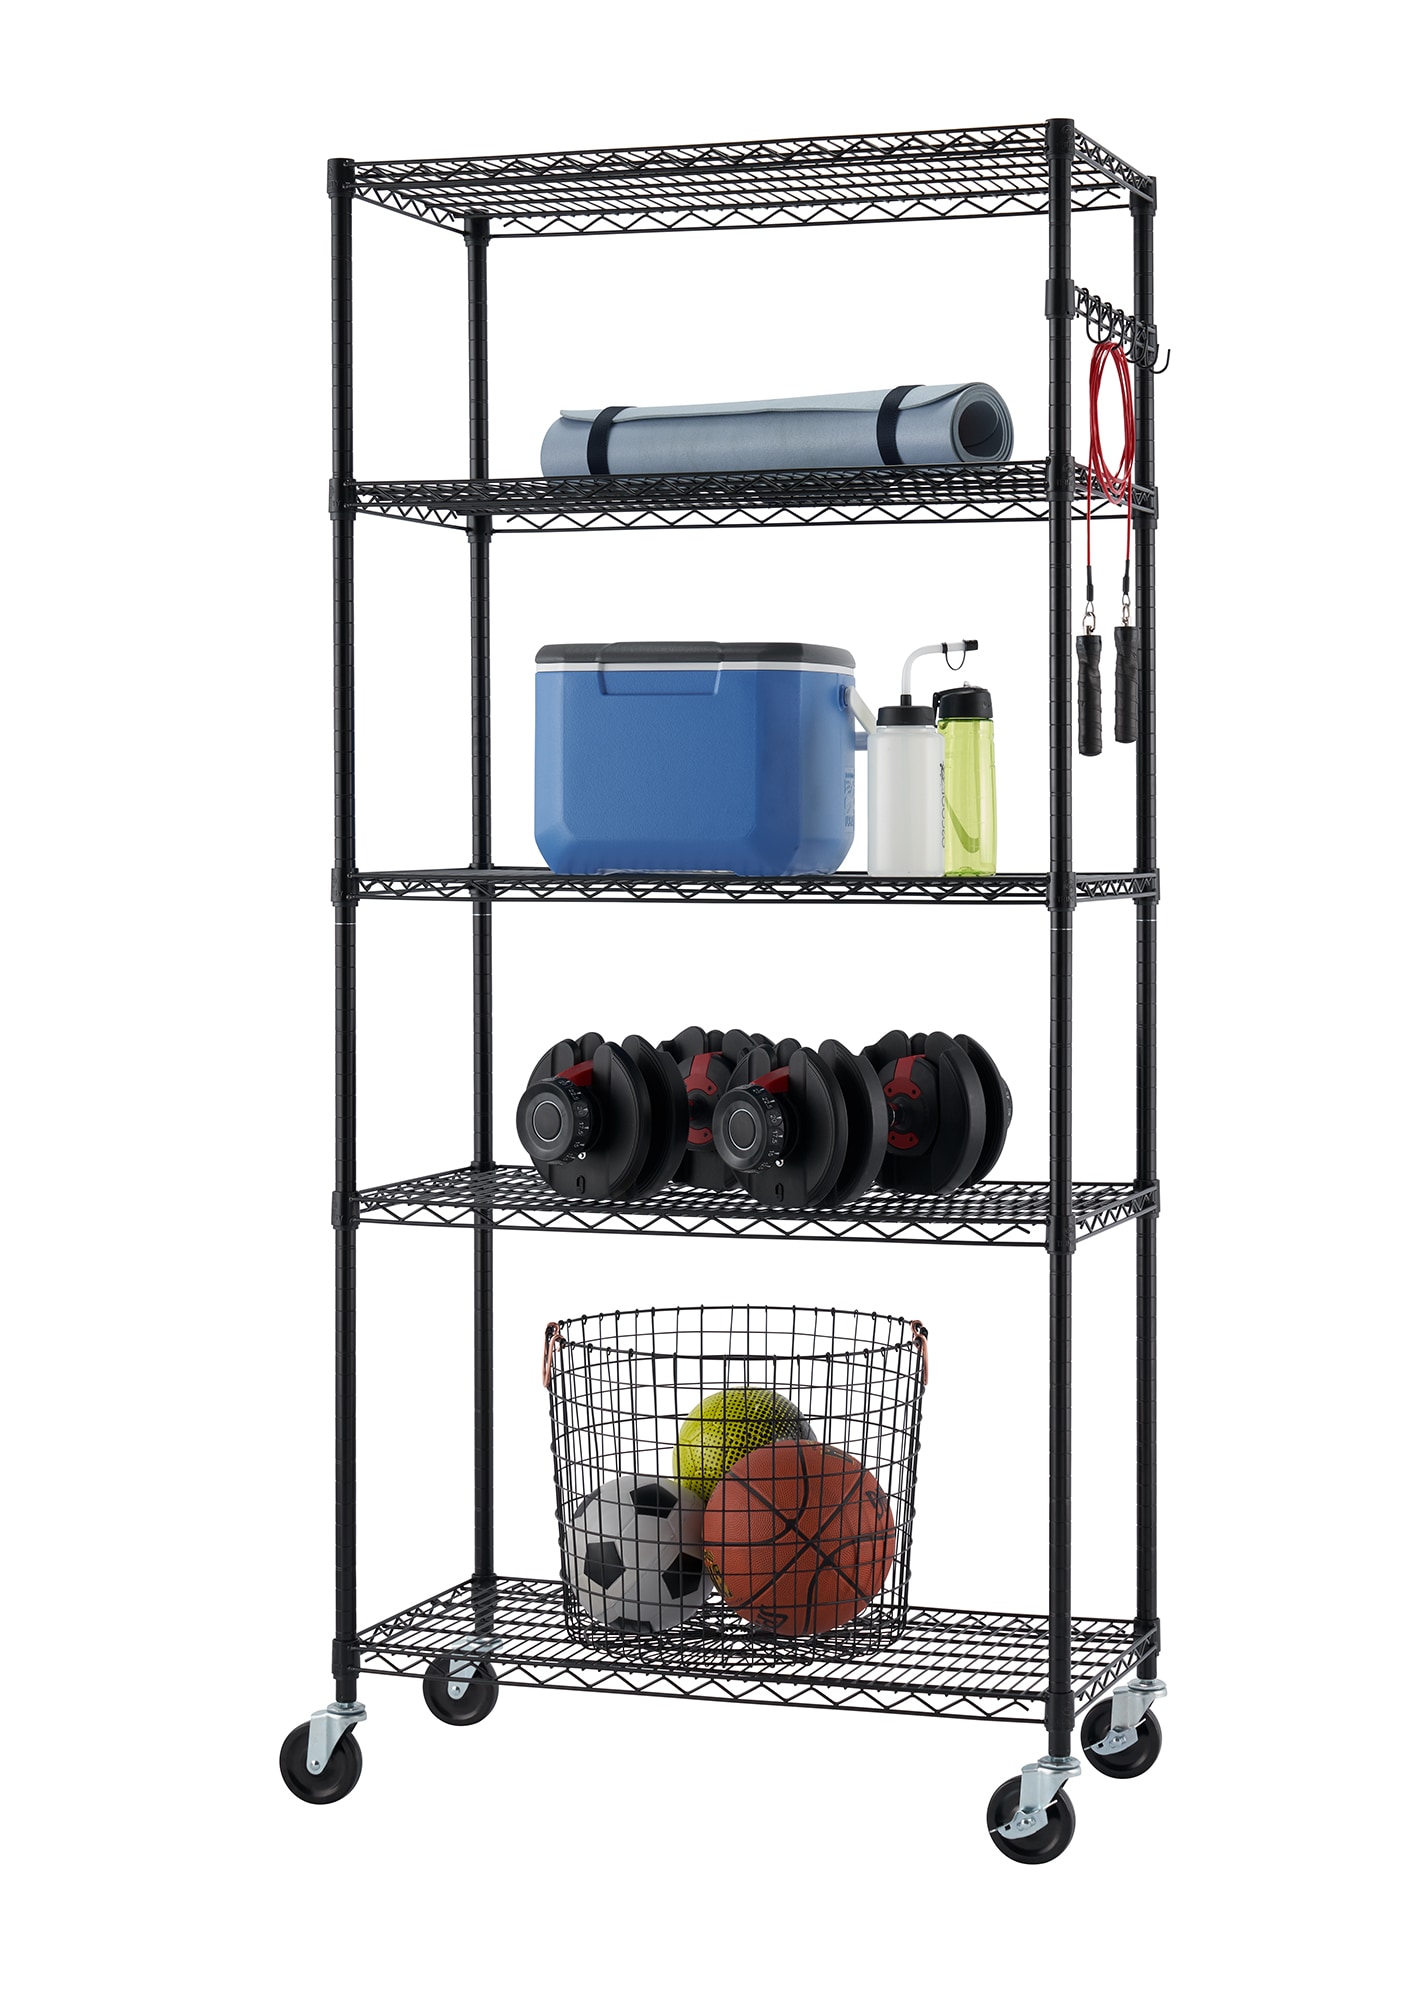 72W x 24D Bulk Rack Wire Deck Extra Level. Bulk Rack  Shelving is <strong>designed for storage areas in which goods are handled  manually instead of being transported on a pallet</strong>.